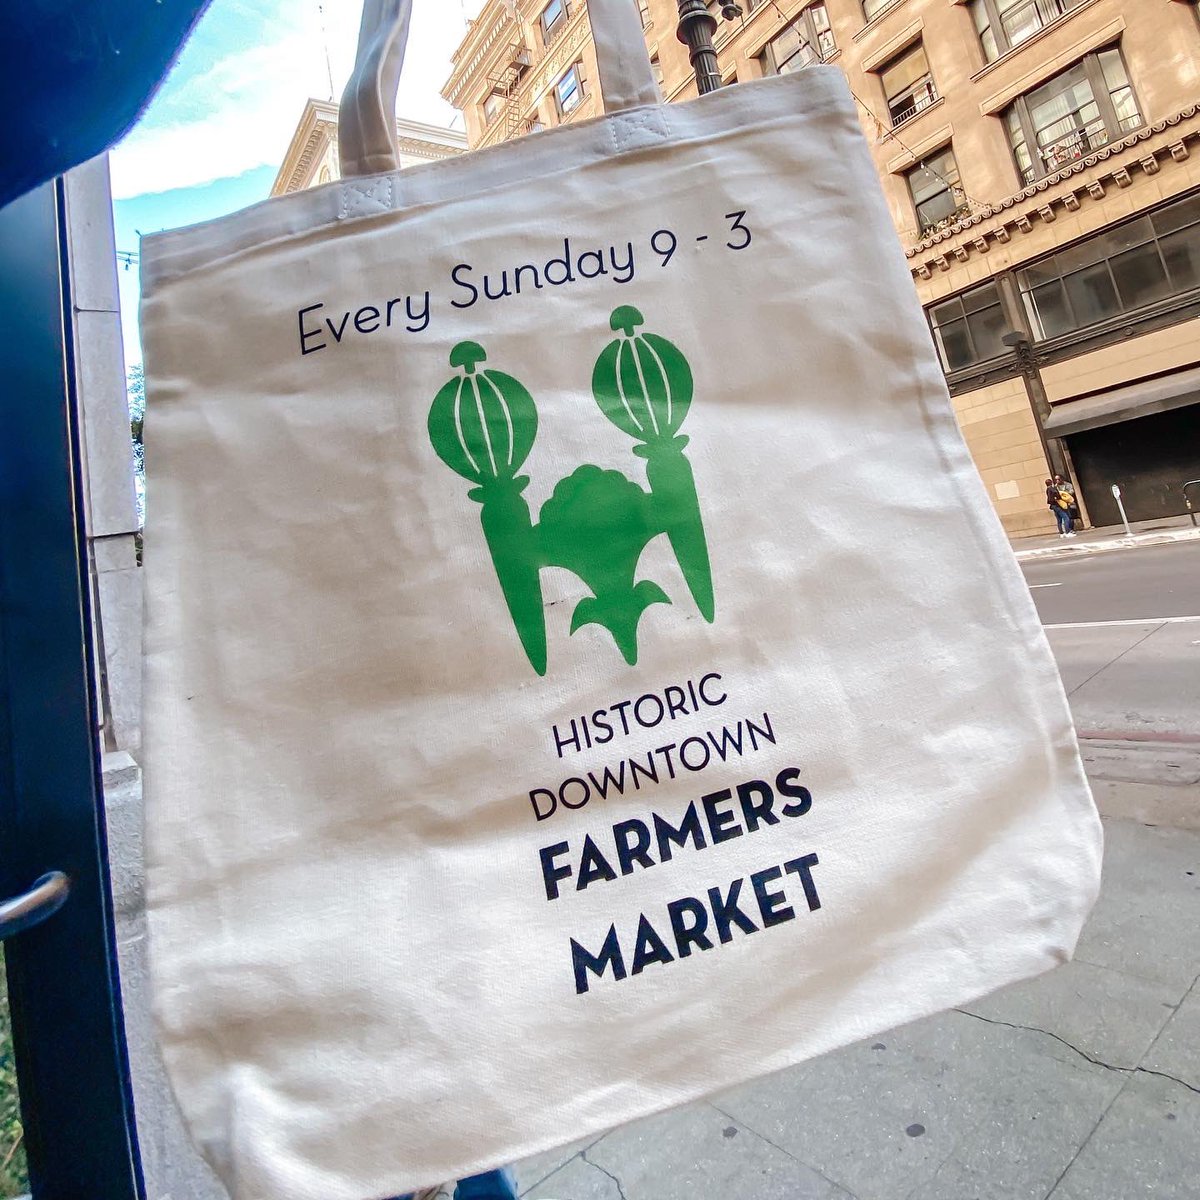 Get your local, seasonal fruits and veggies at the @dtlamarket today from 9a - 3pm! 🌽🍅🥬Also look for our new bags available for free for all shoppers at the Street Plus booth! #farmersmarketla #seasonalfood #supportlocal #seasonalproduce #dtla #historiccore